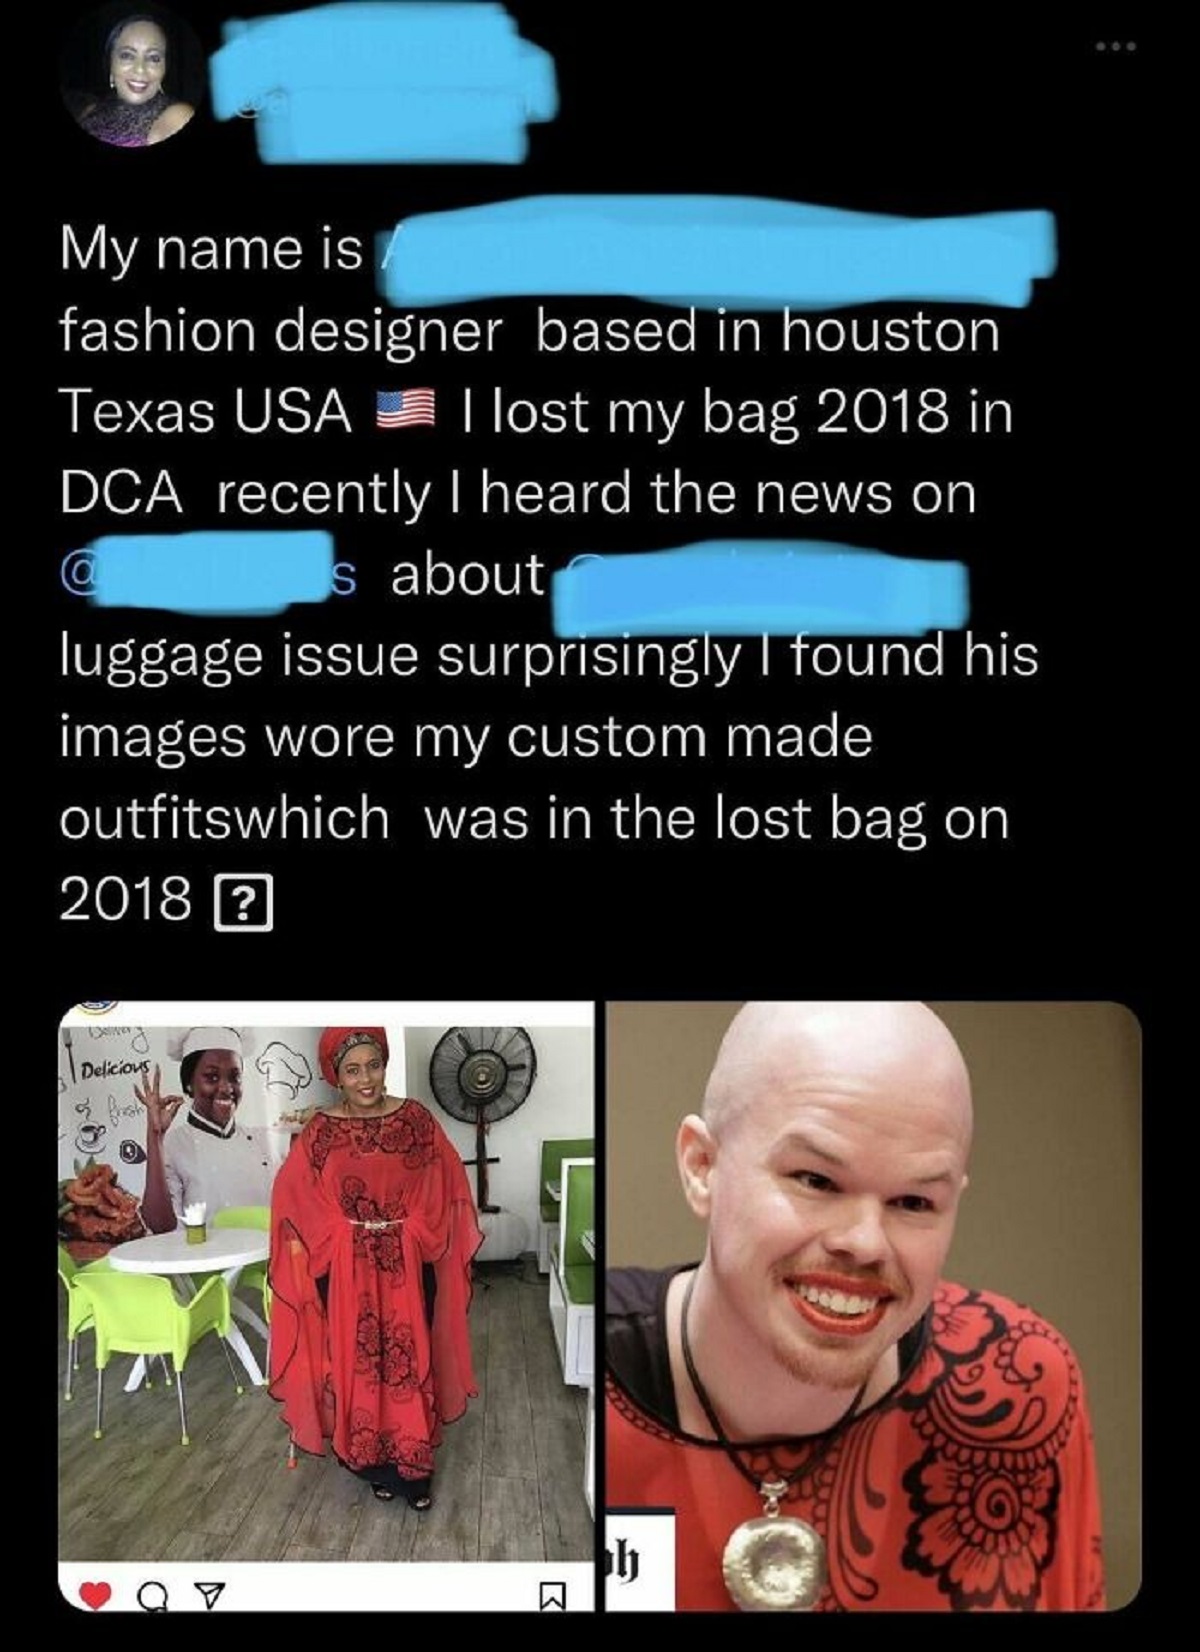 cringe pics - media - My name is fashion designer based in houston Texas Usa I lost my bag 2018 in Dca recently I heard the news on s about luggage issue surprisingly I found his images wore my custom made outfitswhich was in the lost bag on 2018 ? Ne Del